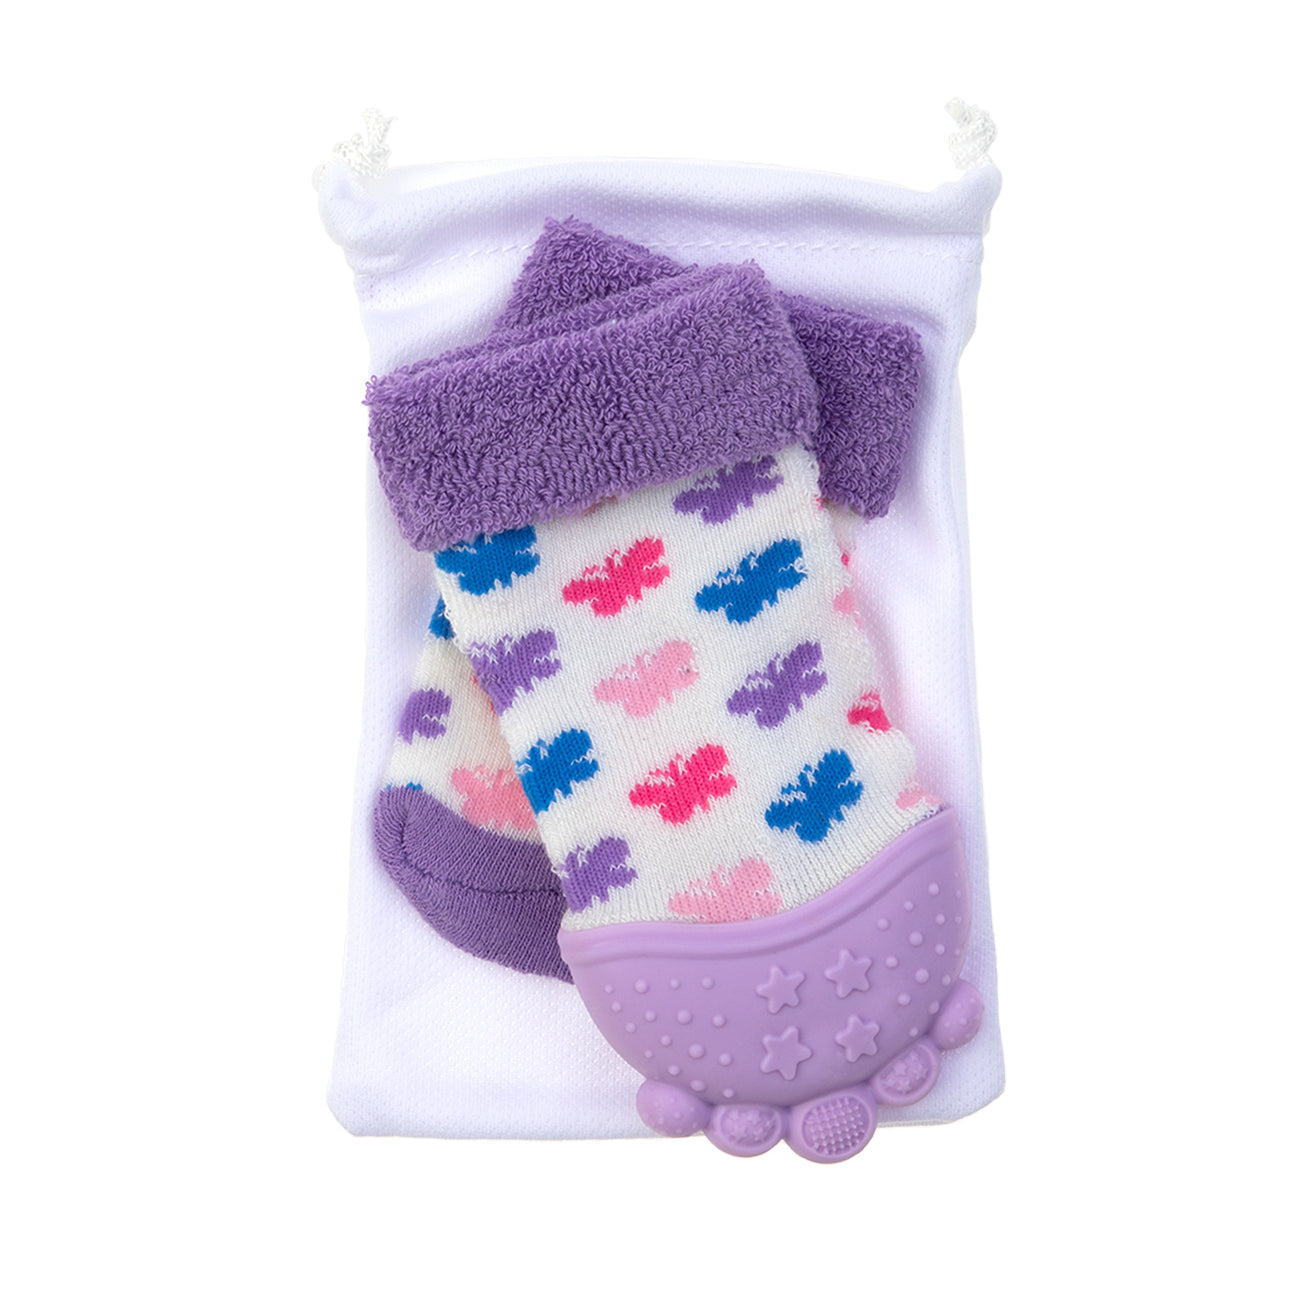 Soft Teether Sock Set with Travel Bag